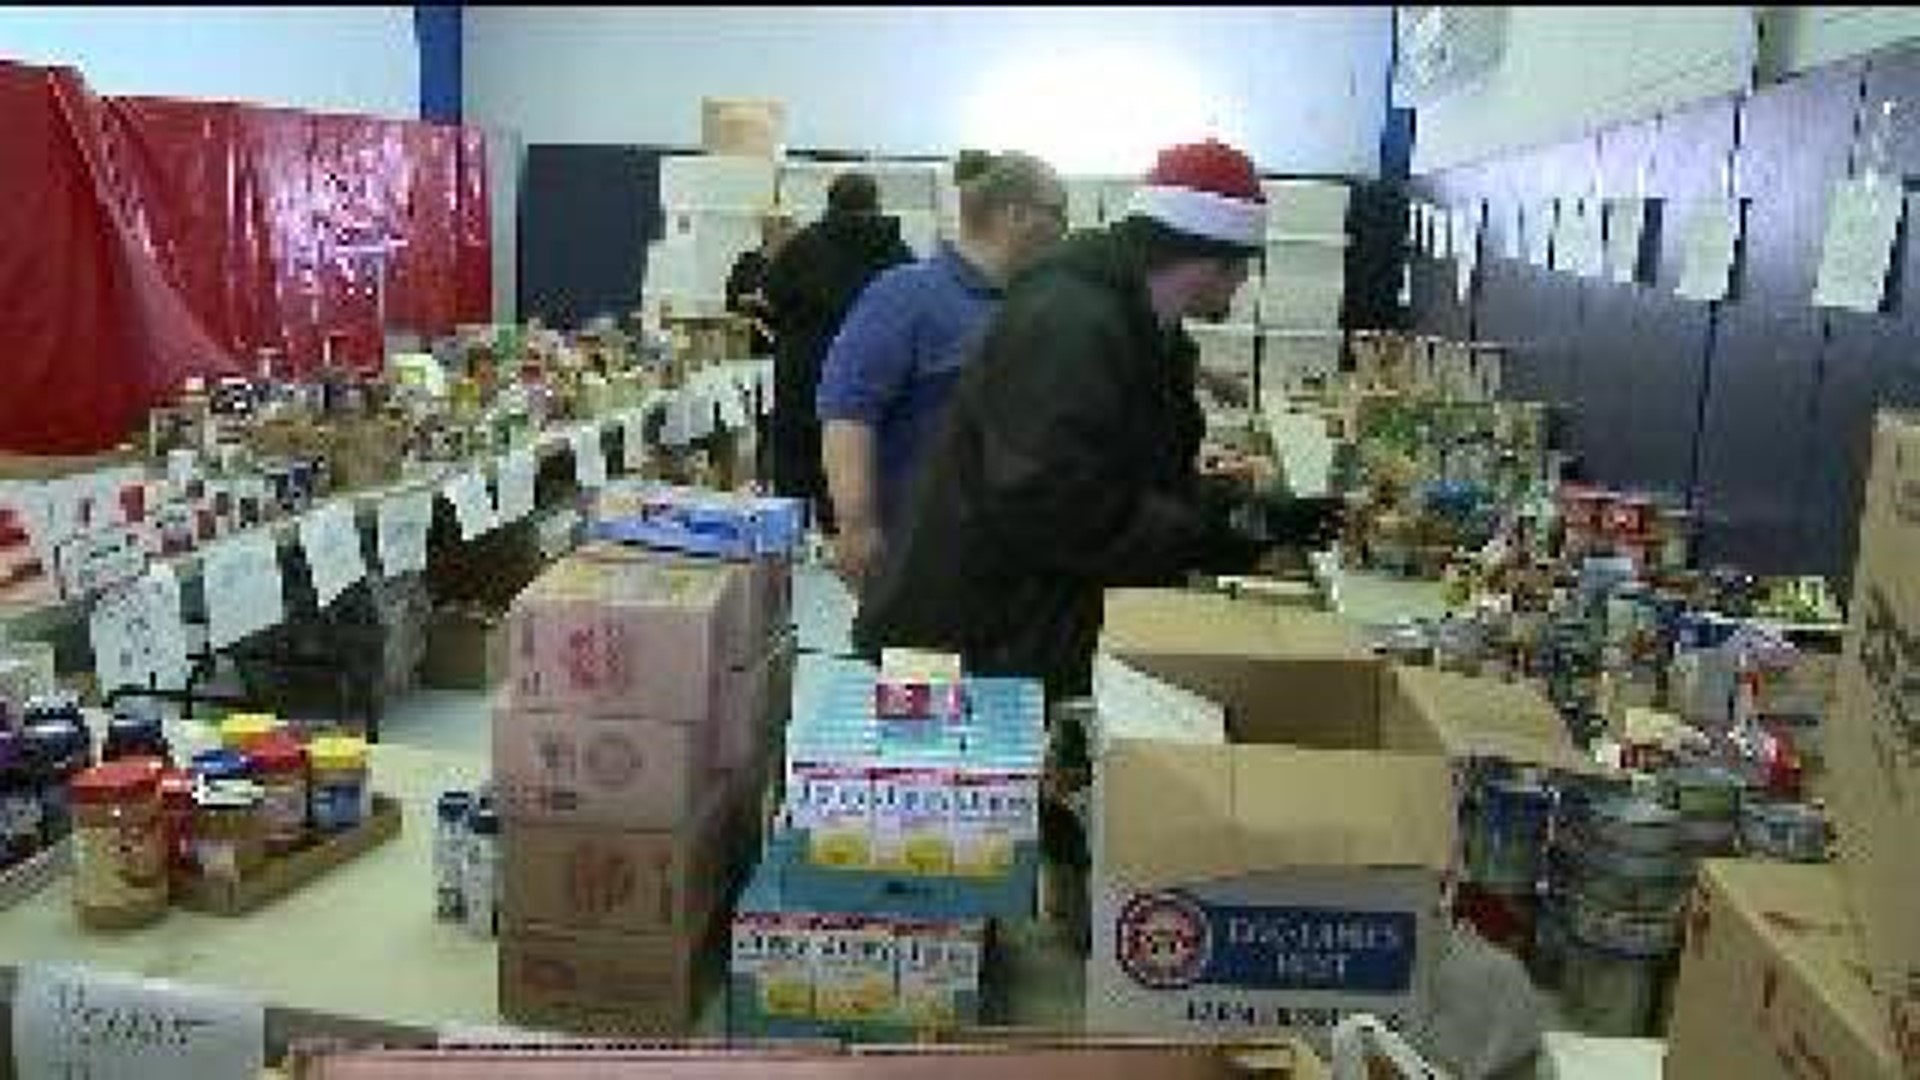 A Holiday Helping Hand To Those In Need In Pottsville